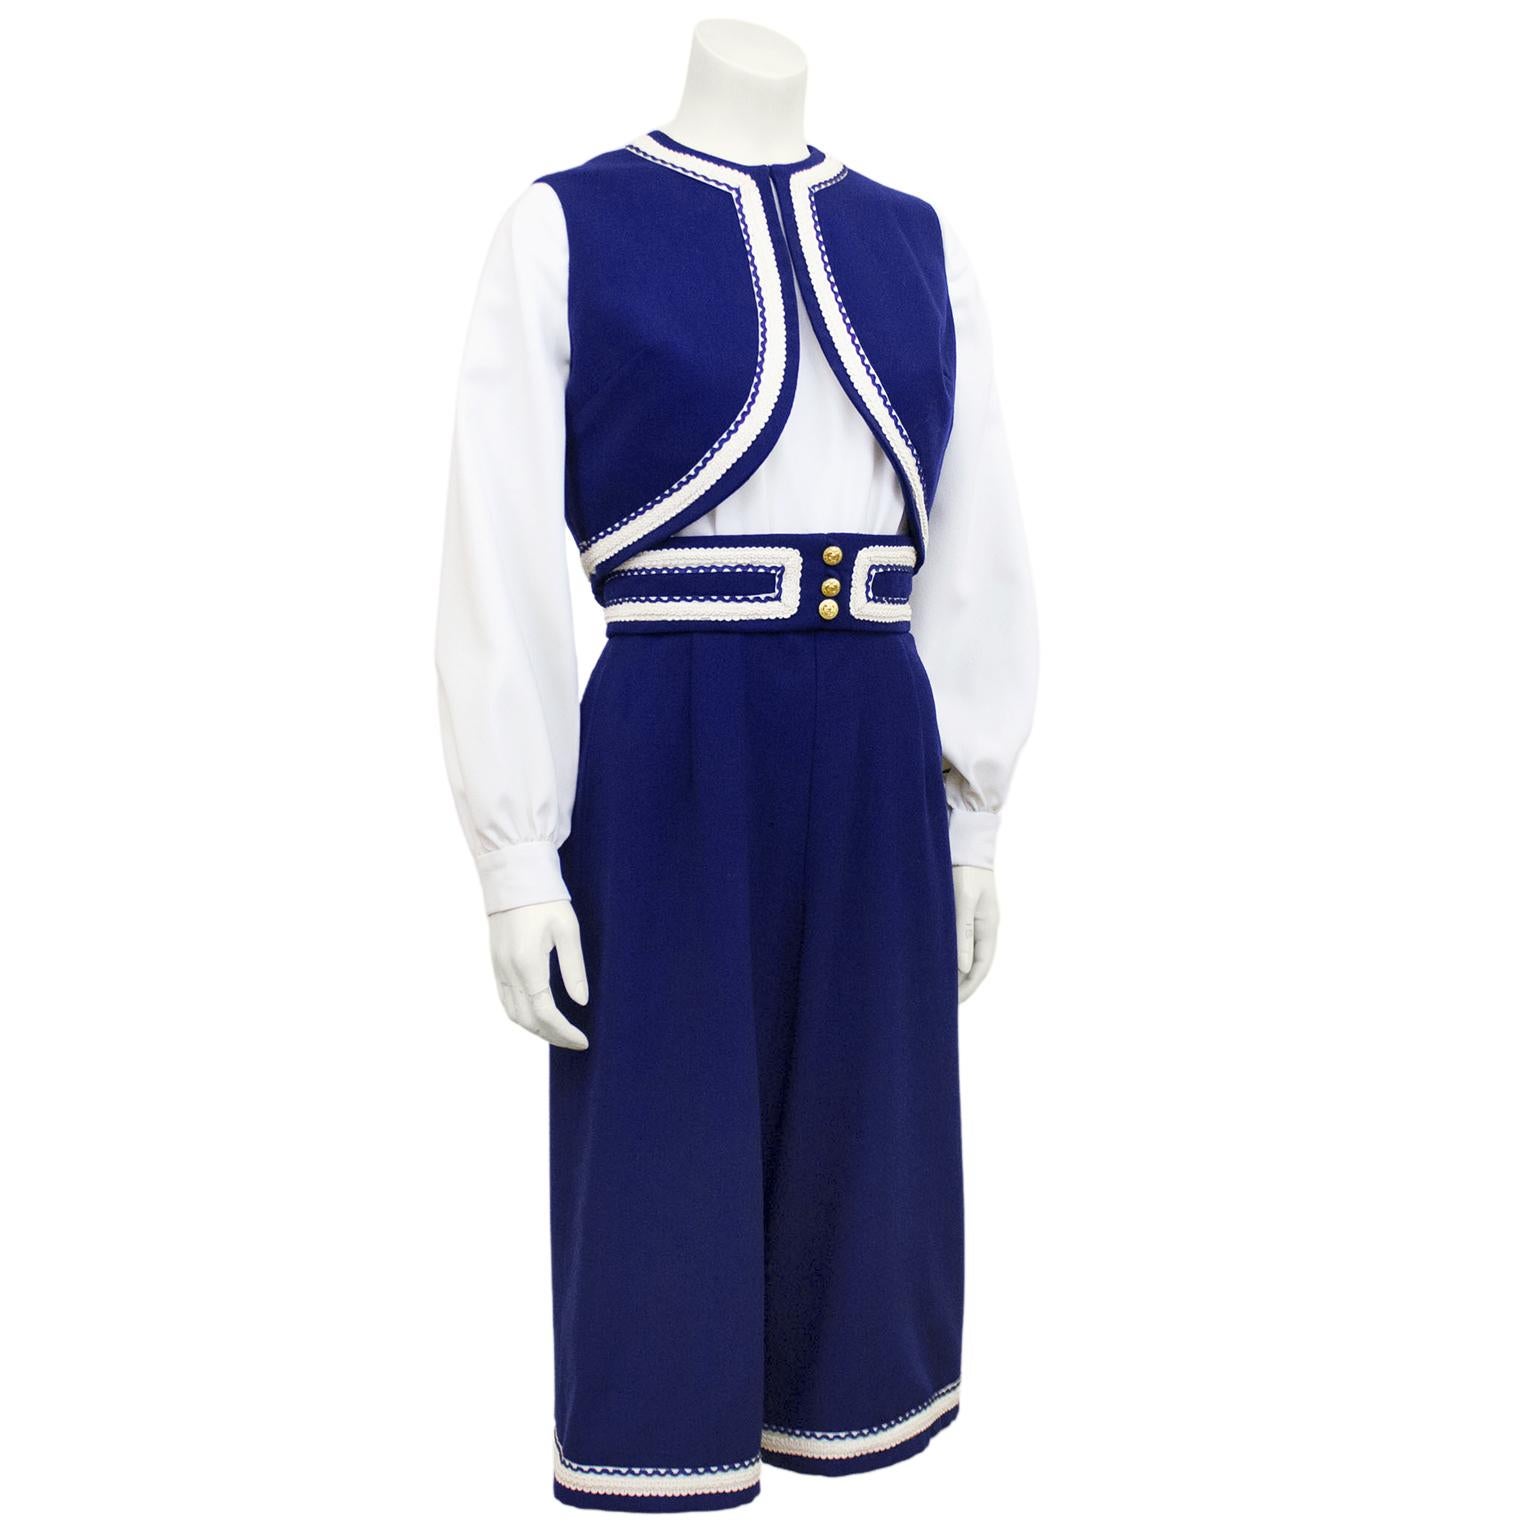 The most adorable 1960s Roger Frères cropped culotte jumpsuit and vest ensemble. The jumpsuit features a white crepe blouse with bishop sleeves and high waisted navy wool pants with ornate white trim. Waistband on pants features white and navy trim